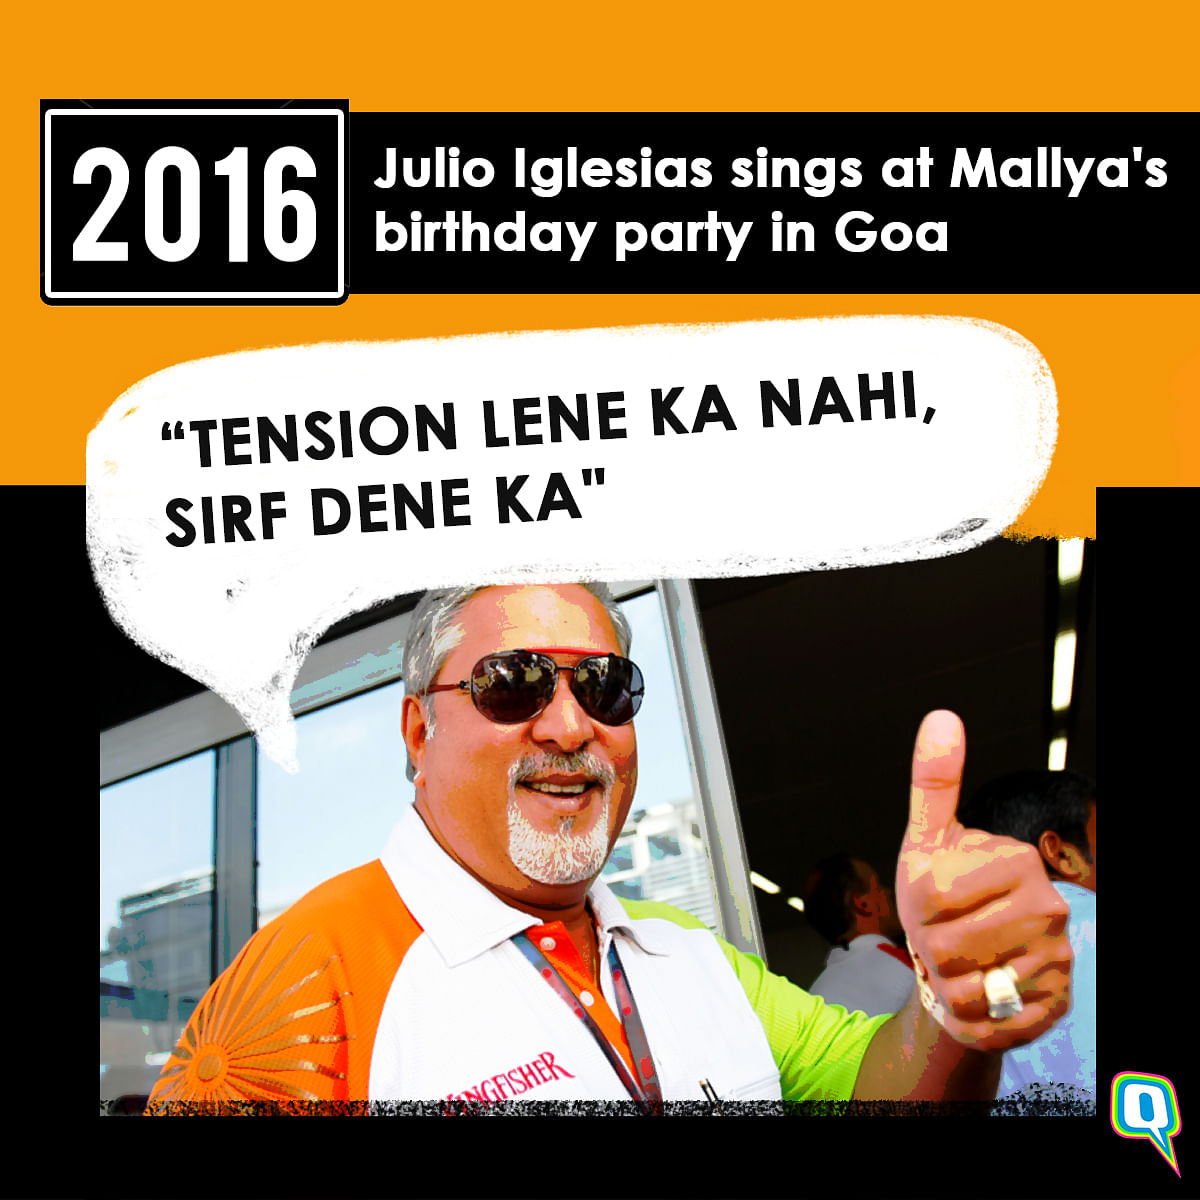 While India awaits his return, here’s a timeline of how Mallya’s good times came to an end.